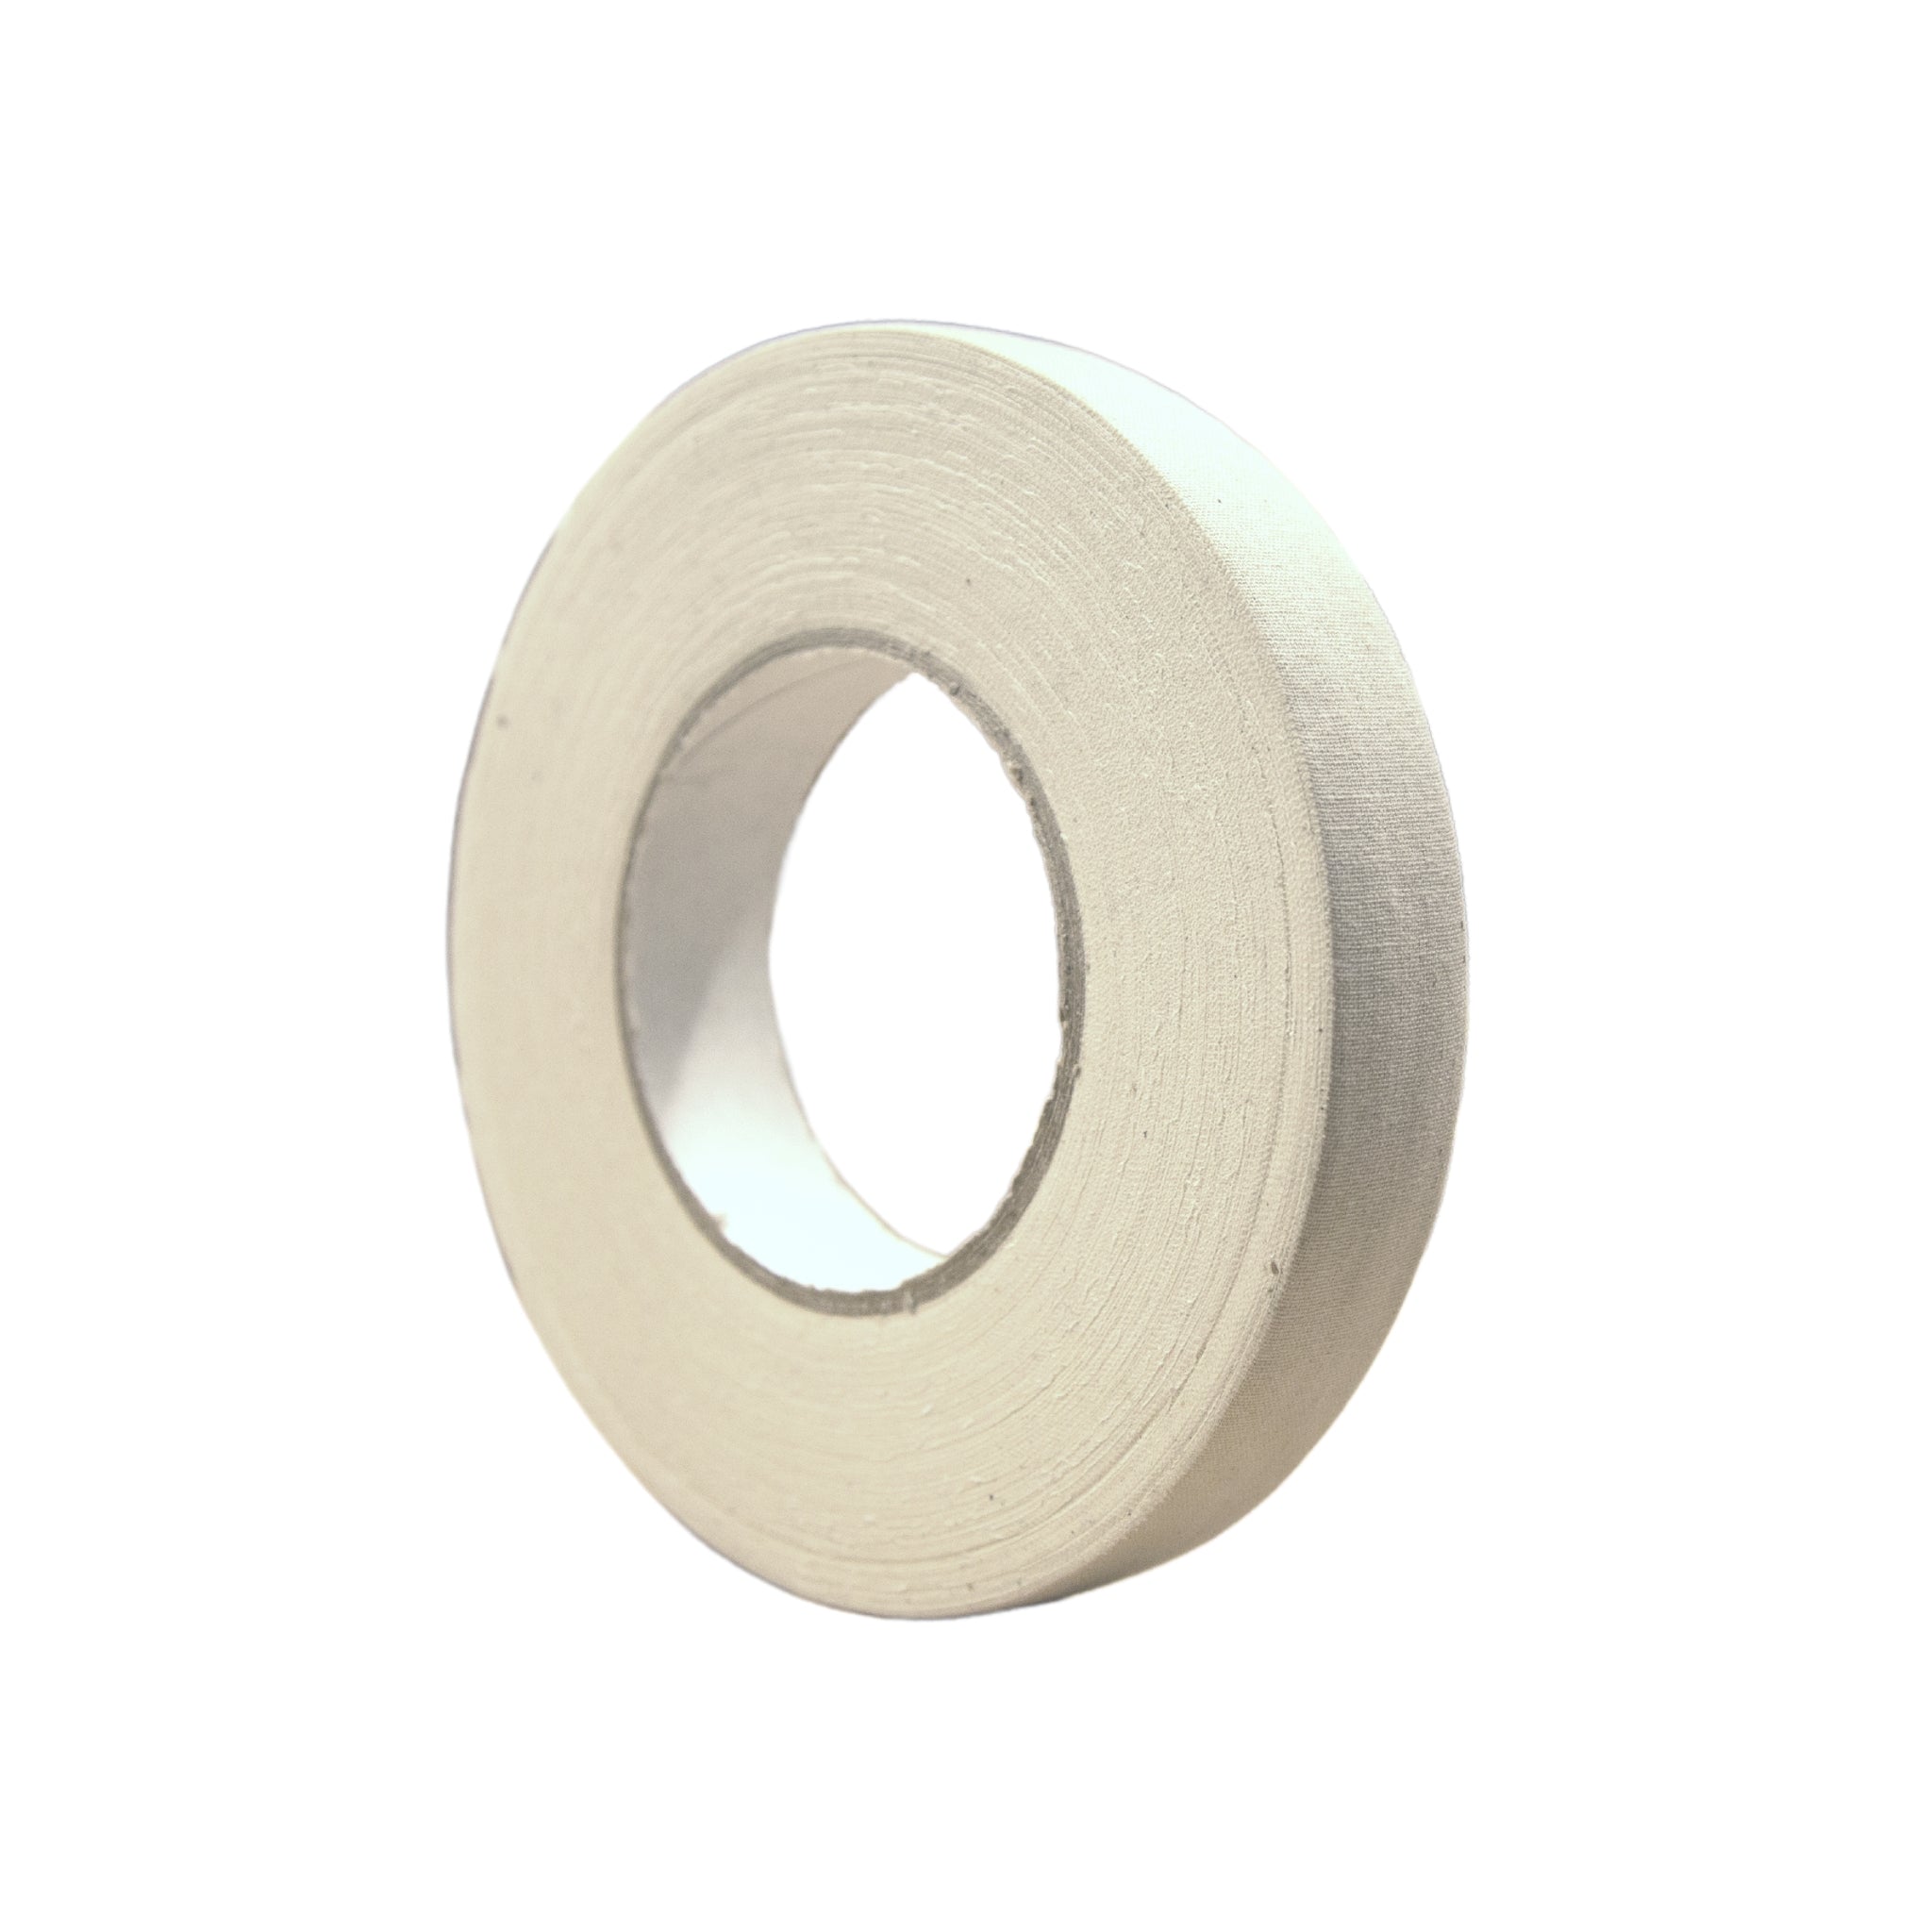 White Cloth Grip tape for Pole Vaulters